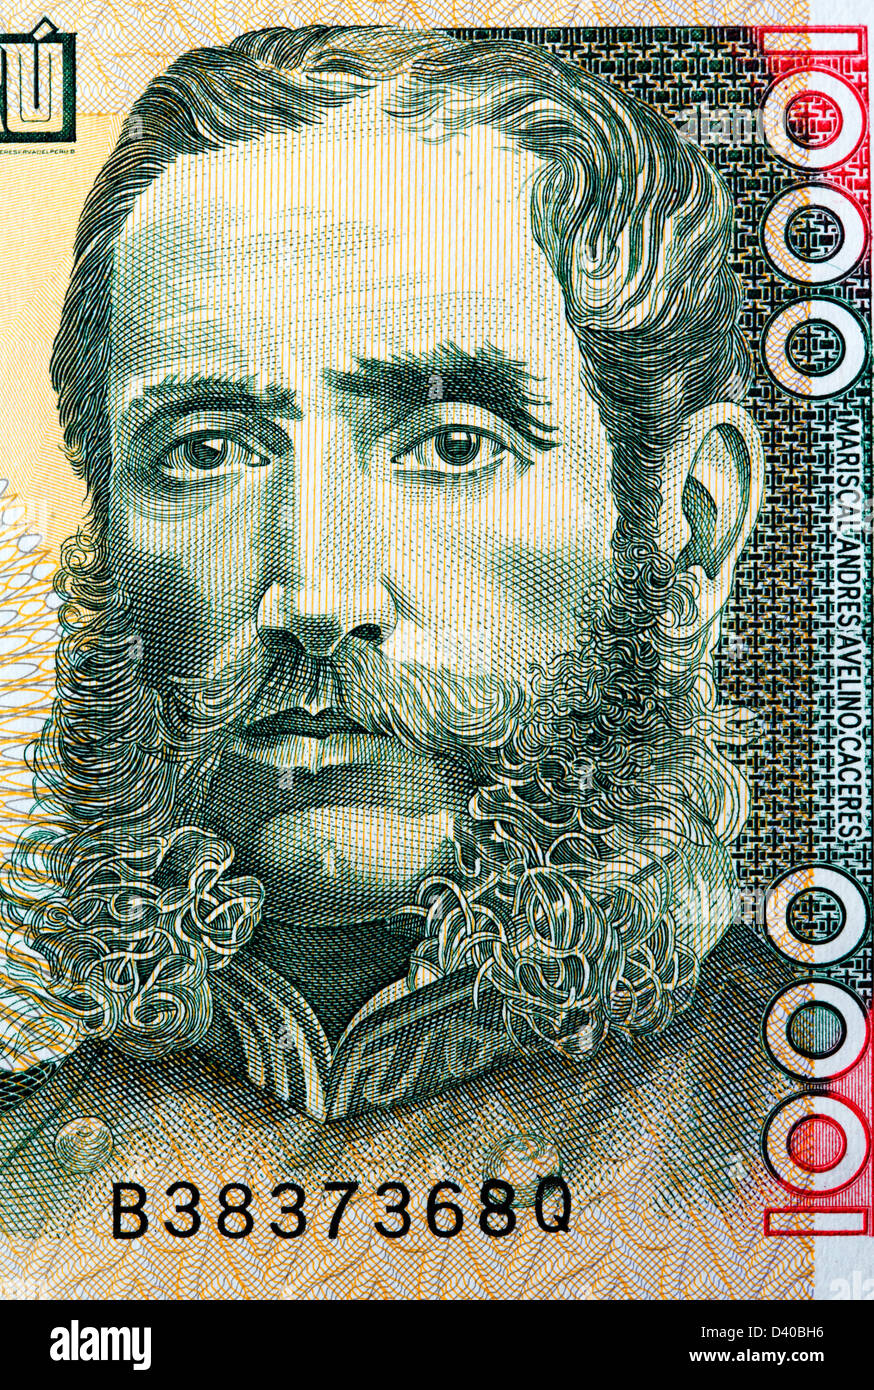 Portrait of Mariscal Andres Avelino Caceres from 1000 Intis banknote, Peru, 1988 Stock Photo